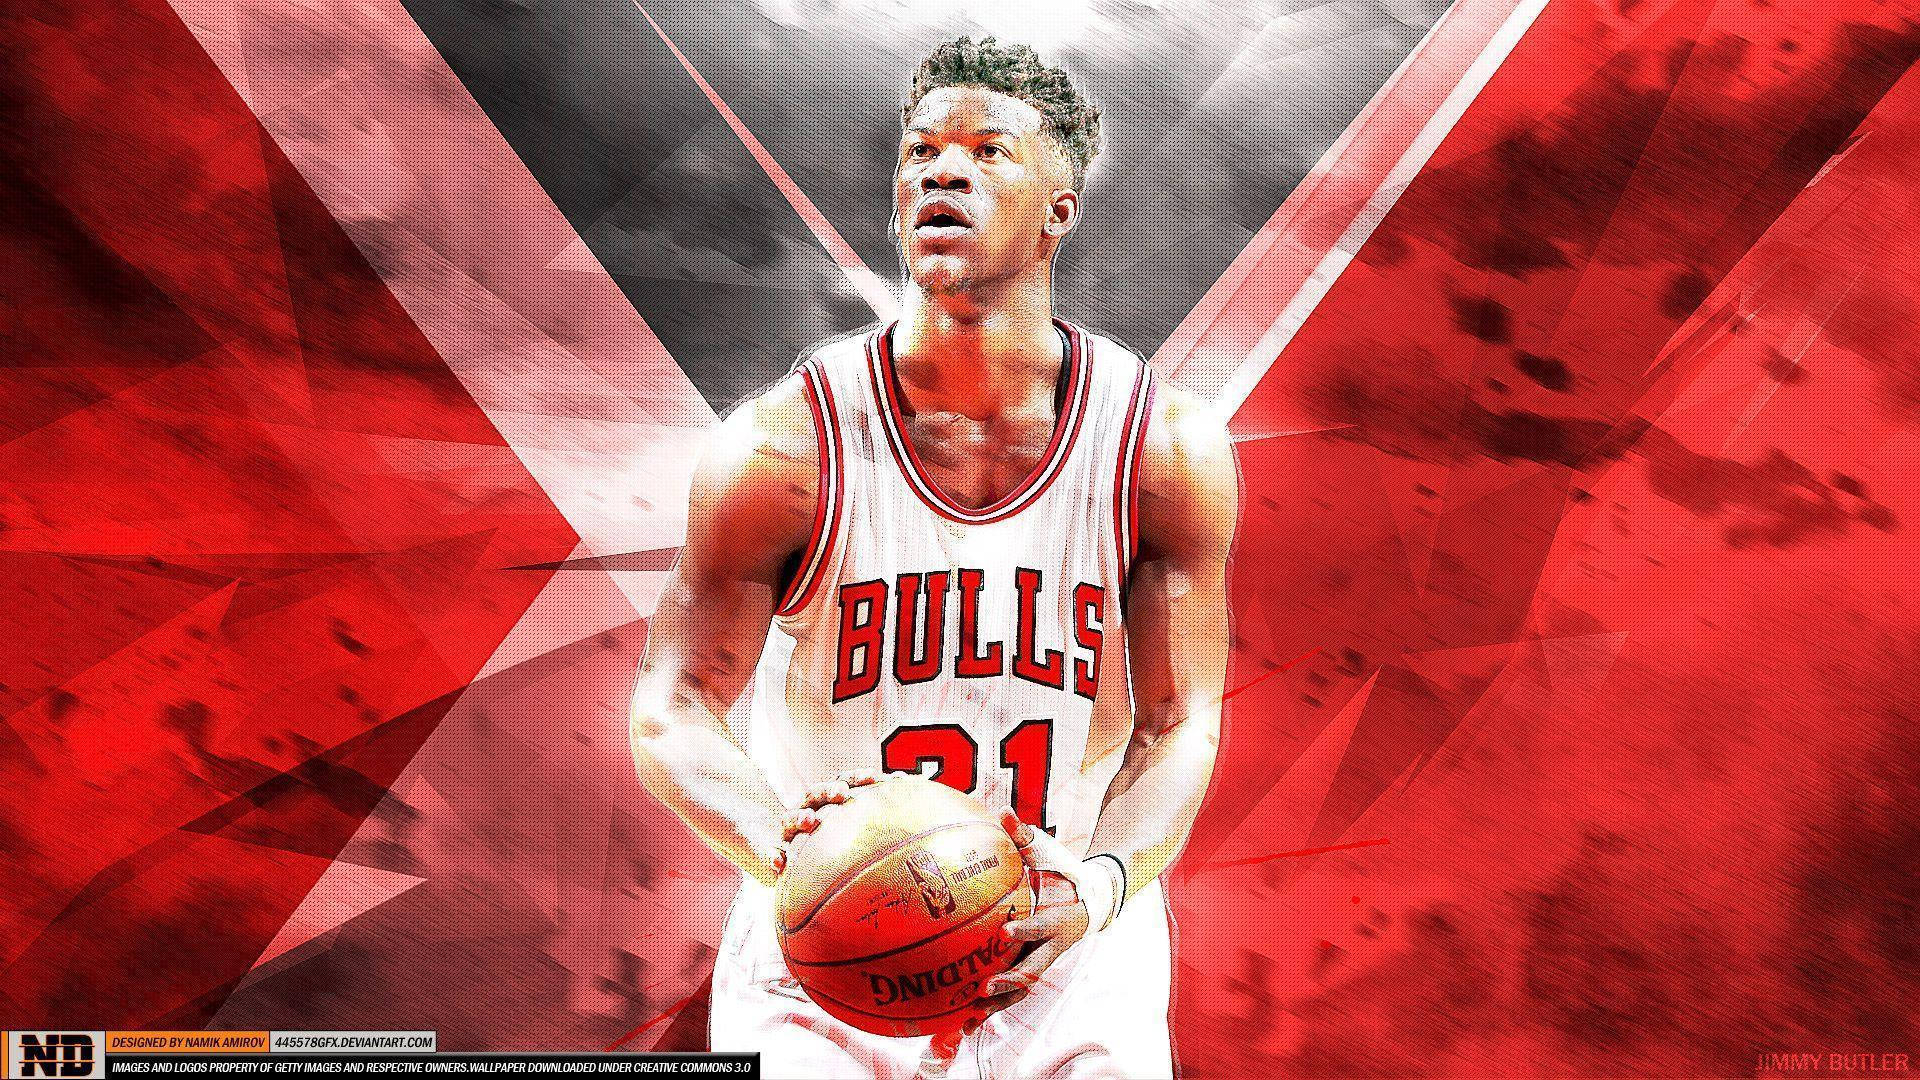 NBA 1920X1080 Wallpaper and Background Image